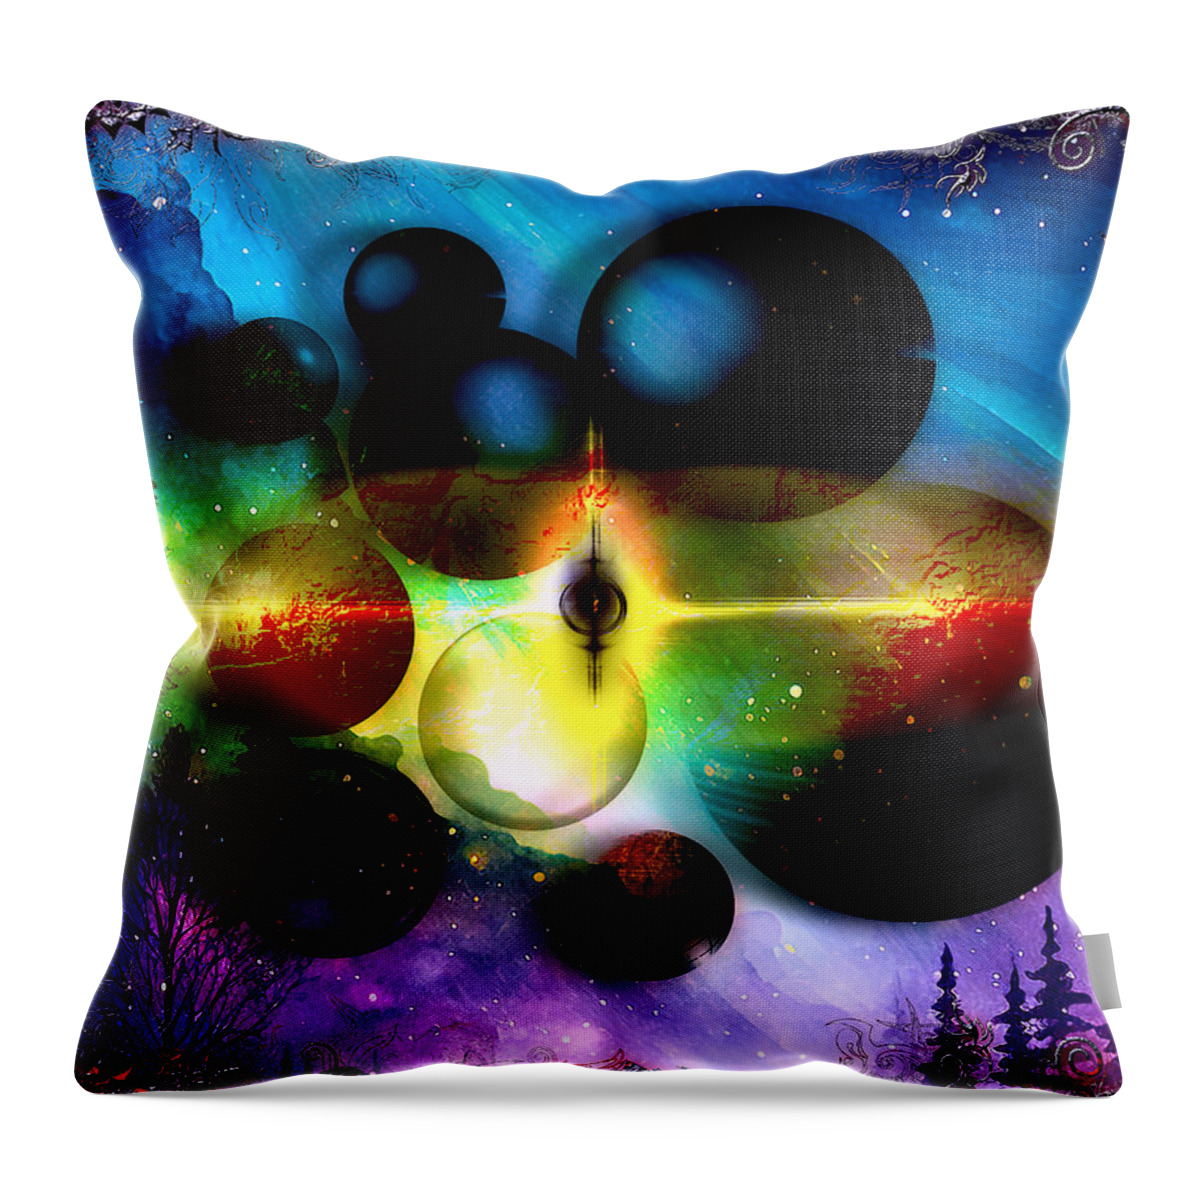 Orb Throw Pillow featuring the digital art Cold Hearted Orb by Michael Damiani